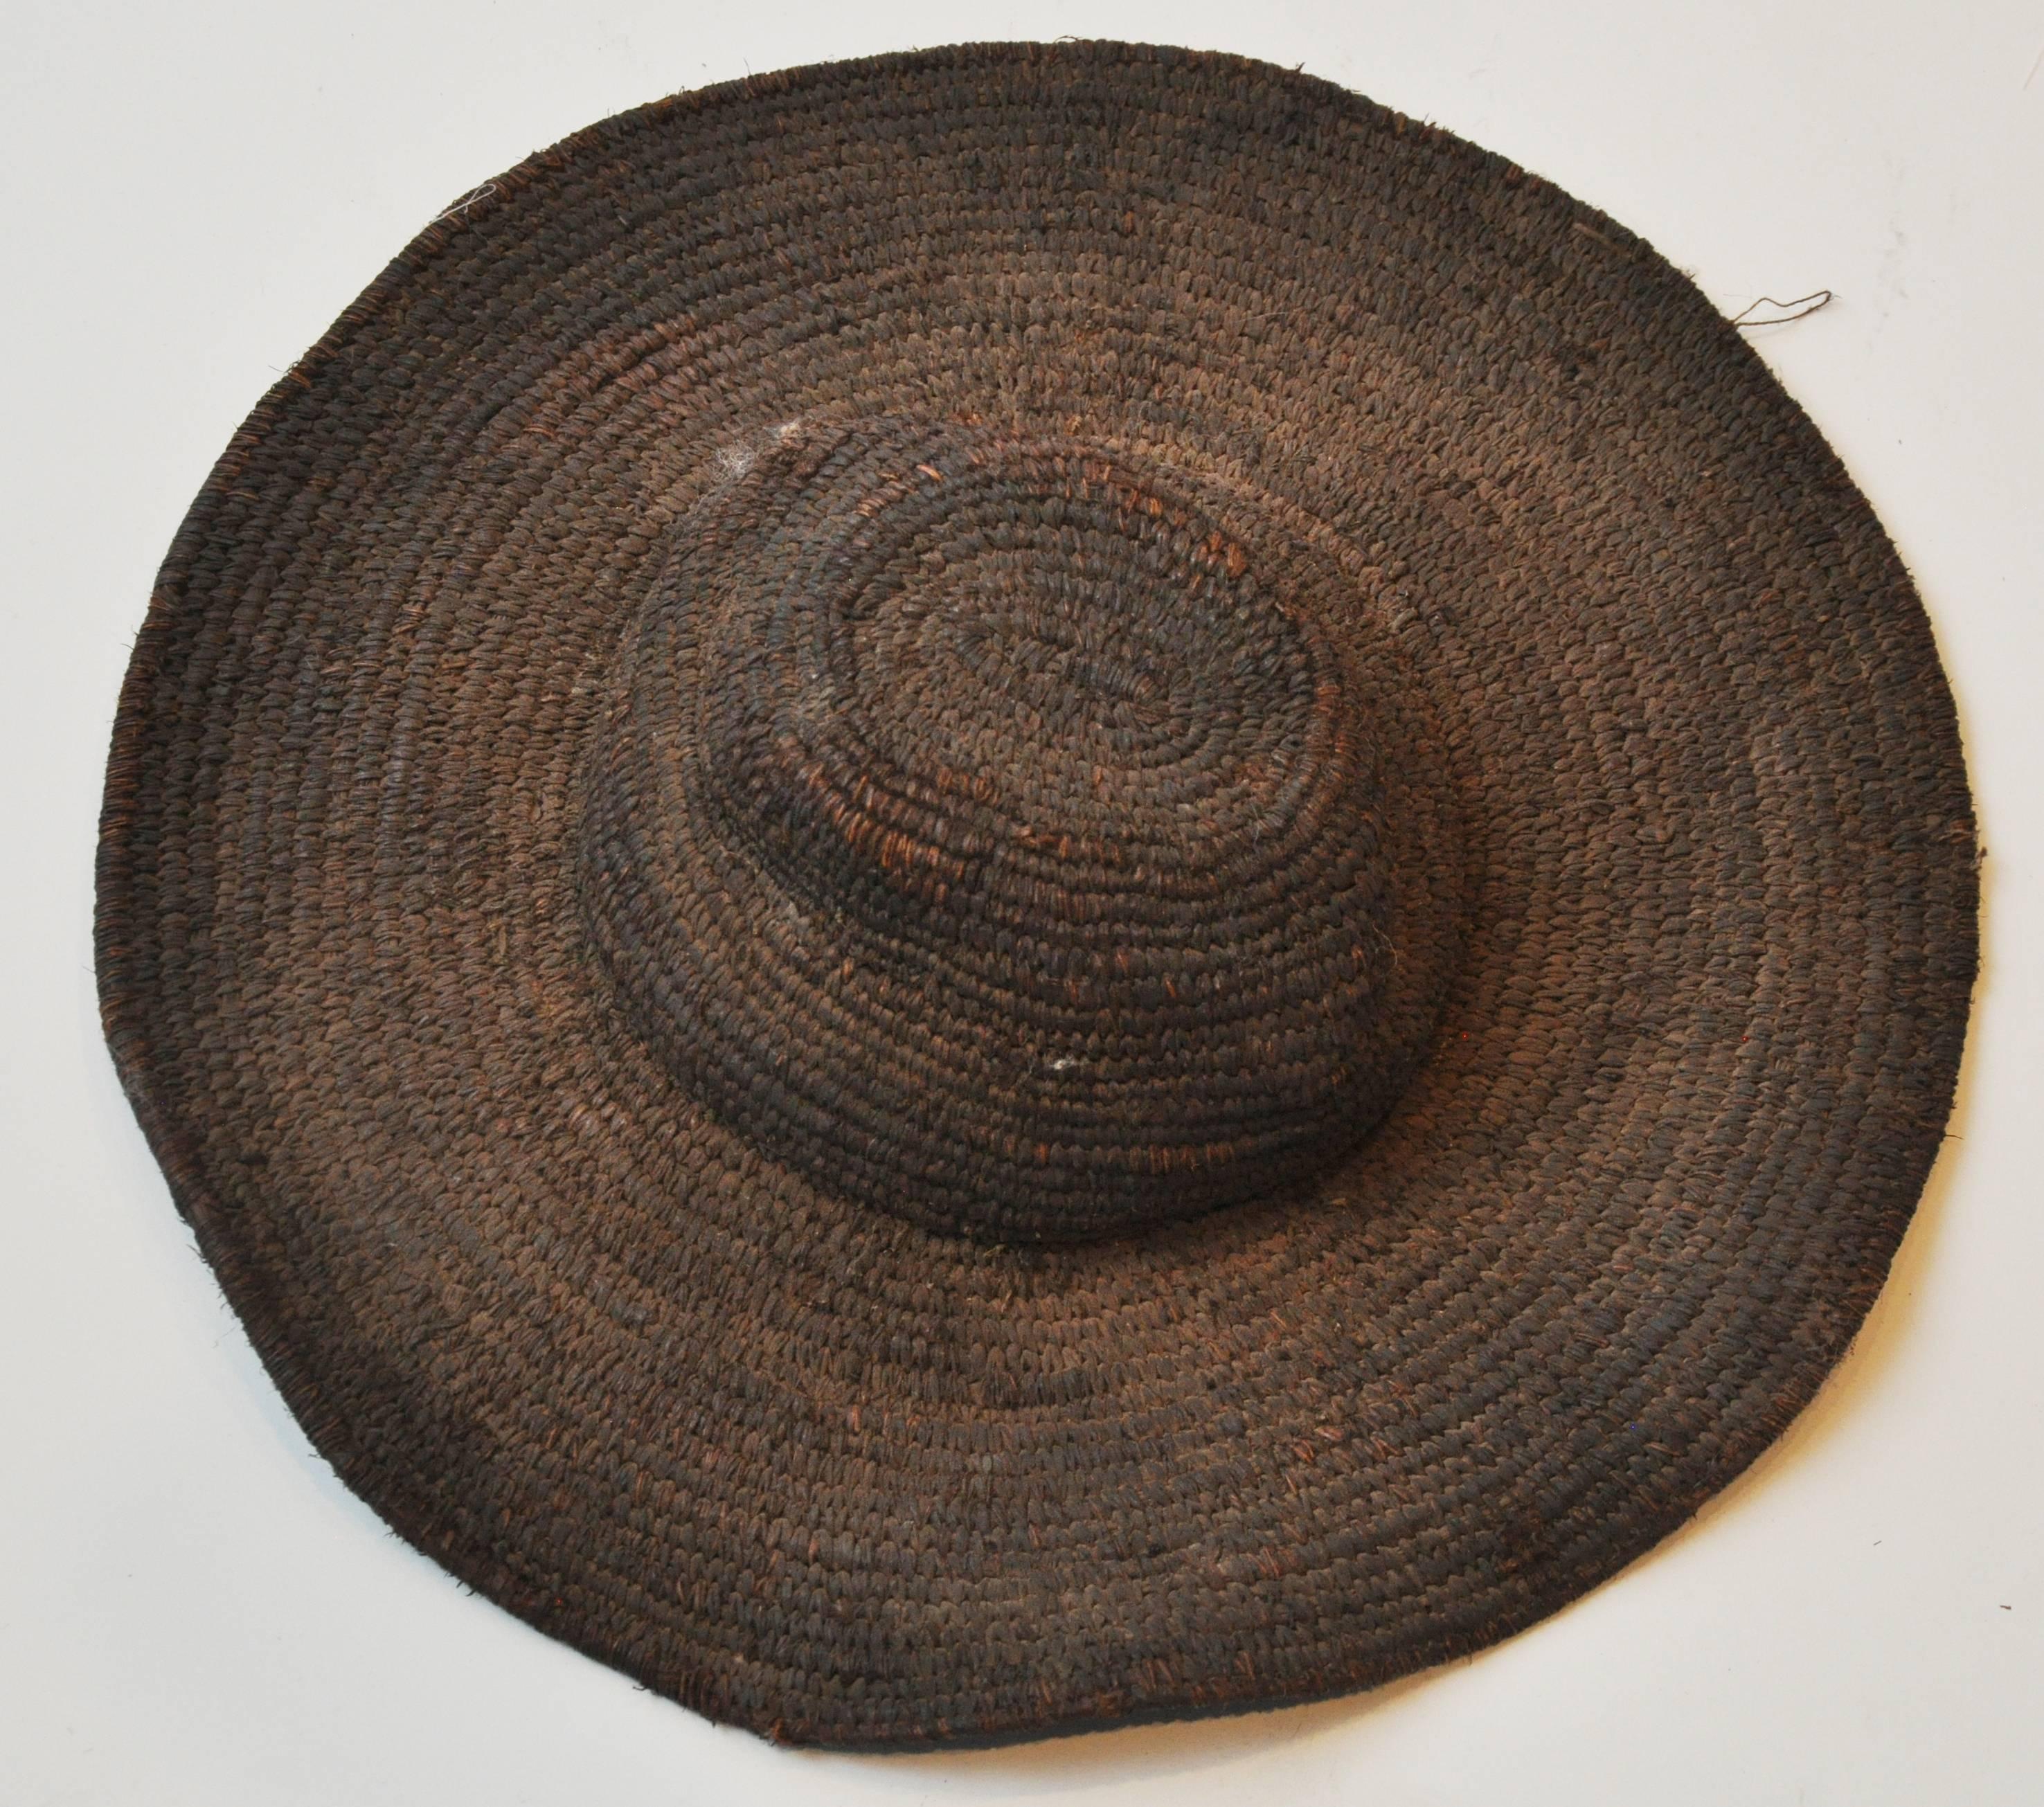 Straw Early 20th Century Woven African Hat from Cameroon